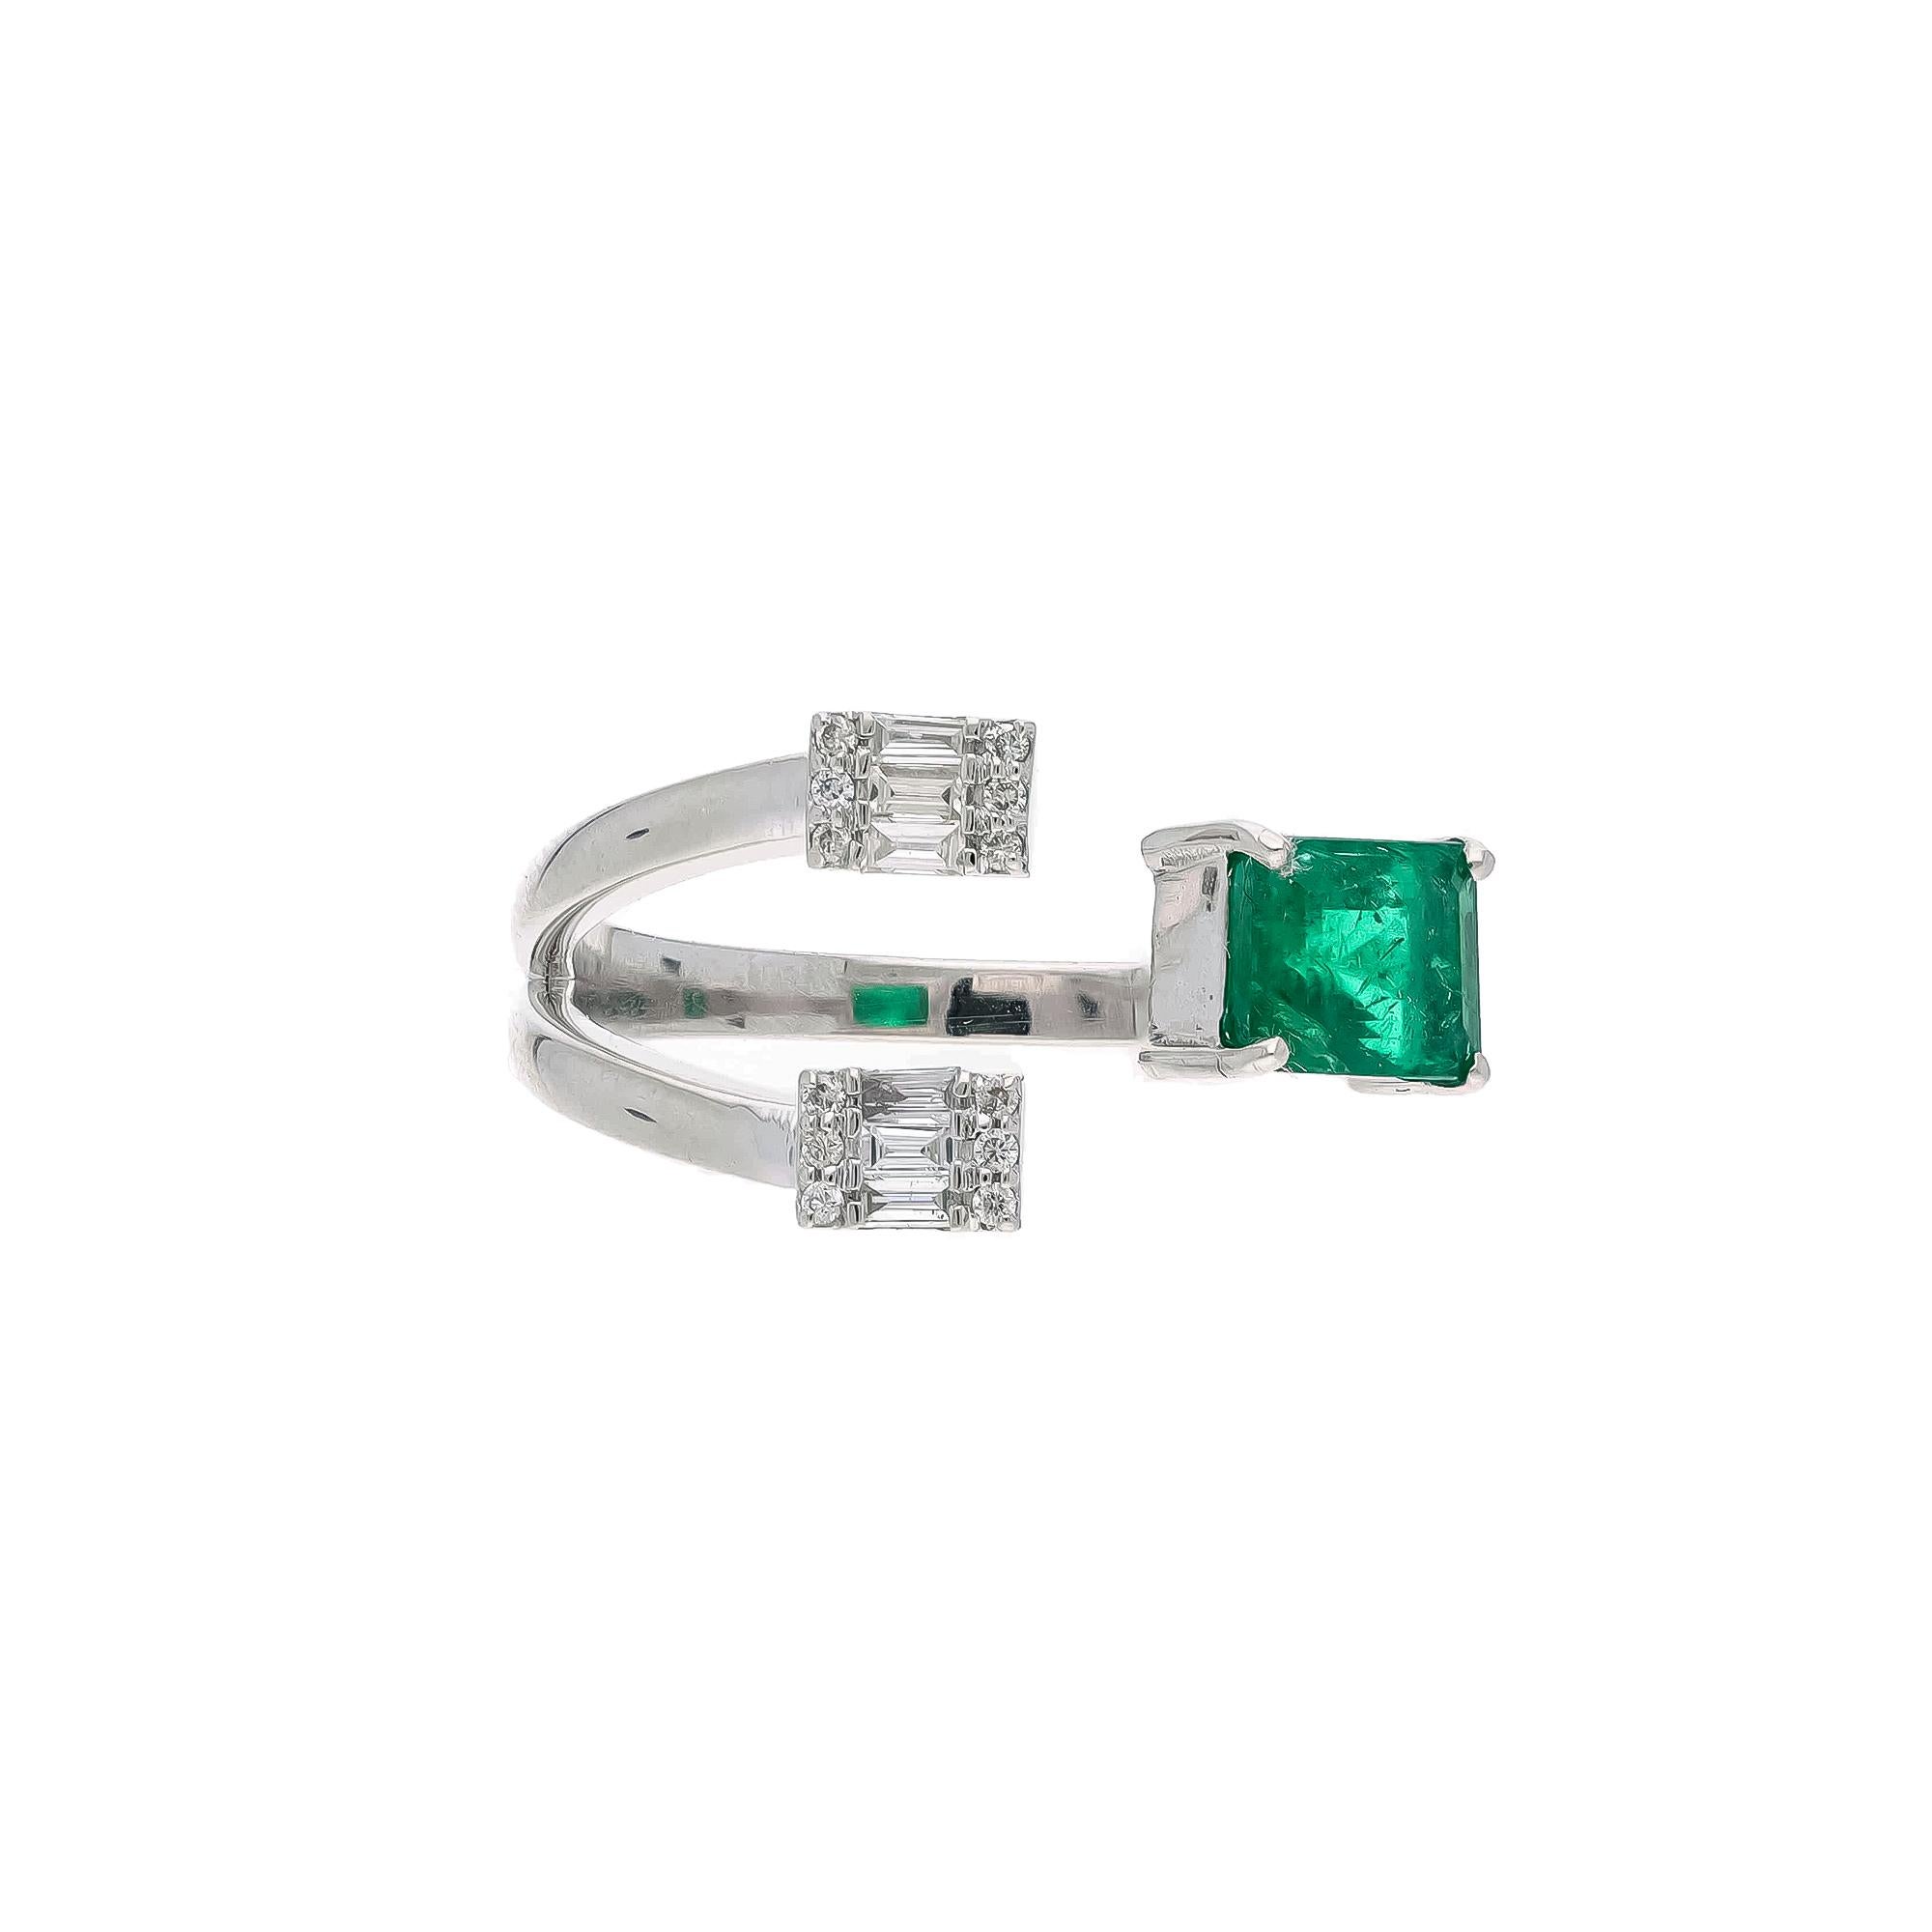 This is a natural Zambian Emerald ring with diamonds and 18k gold. The emeralds are very high quality and very good quality diamonds the clarity is vsi and G colour


Emeralds : 0.91 carats
diamonds : 0.16 carats
gold :3.196 gms

This is a Brand new